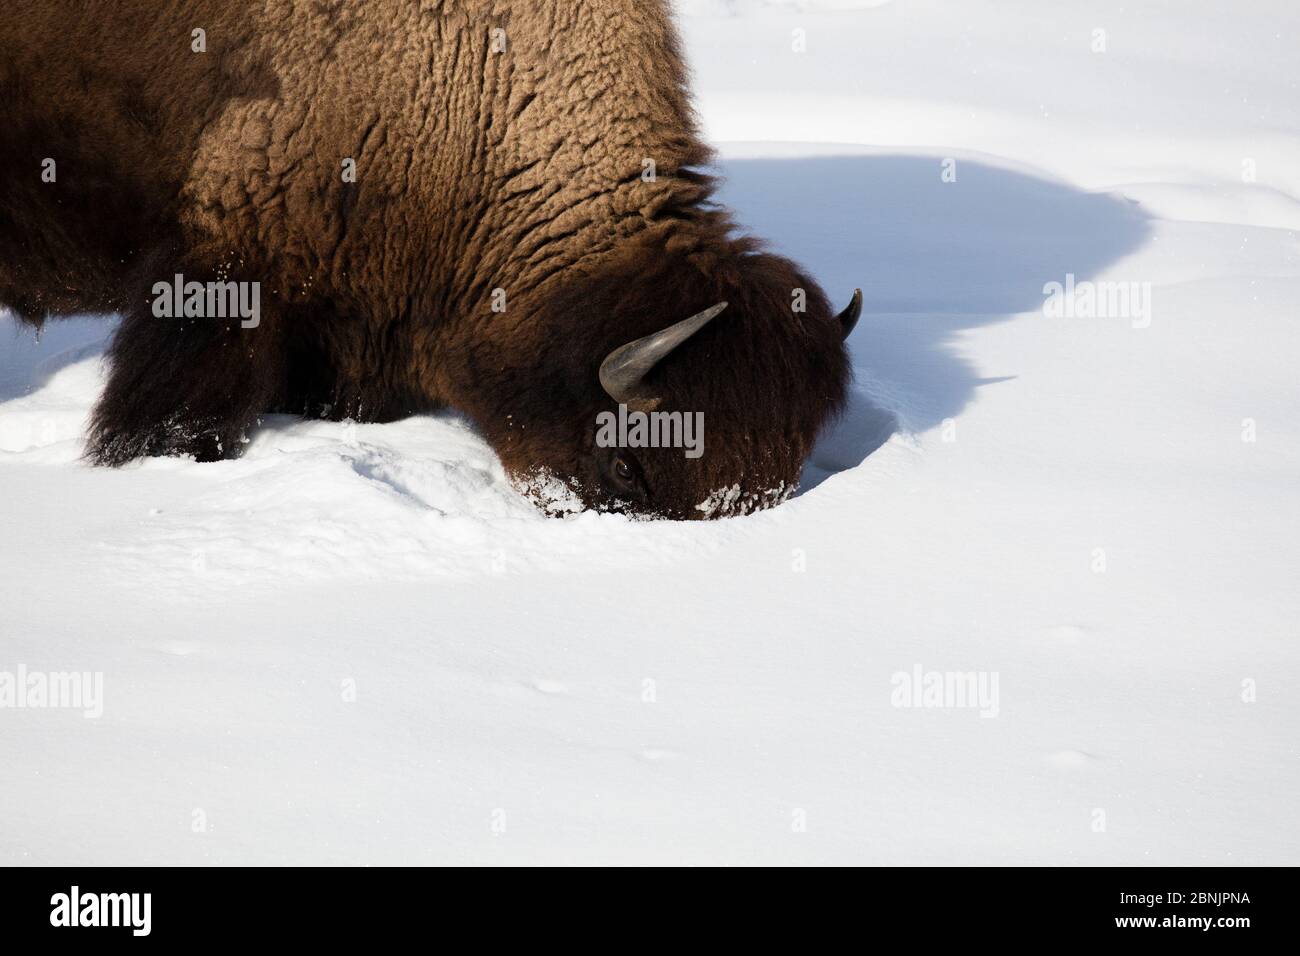 American bison (Bison bison) sticking head in winter snow, Yellowstone National Park, USA. January. Stock Photo